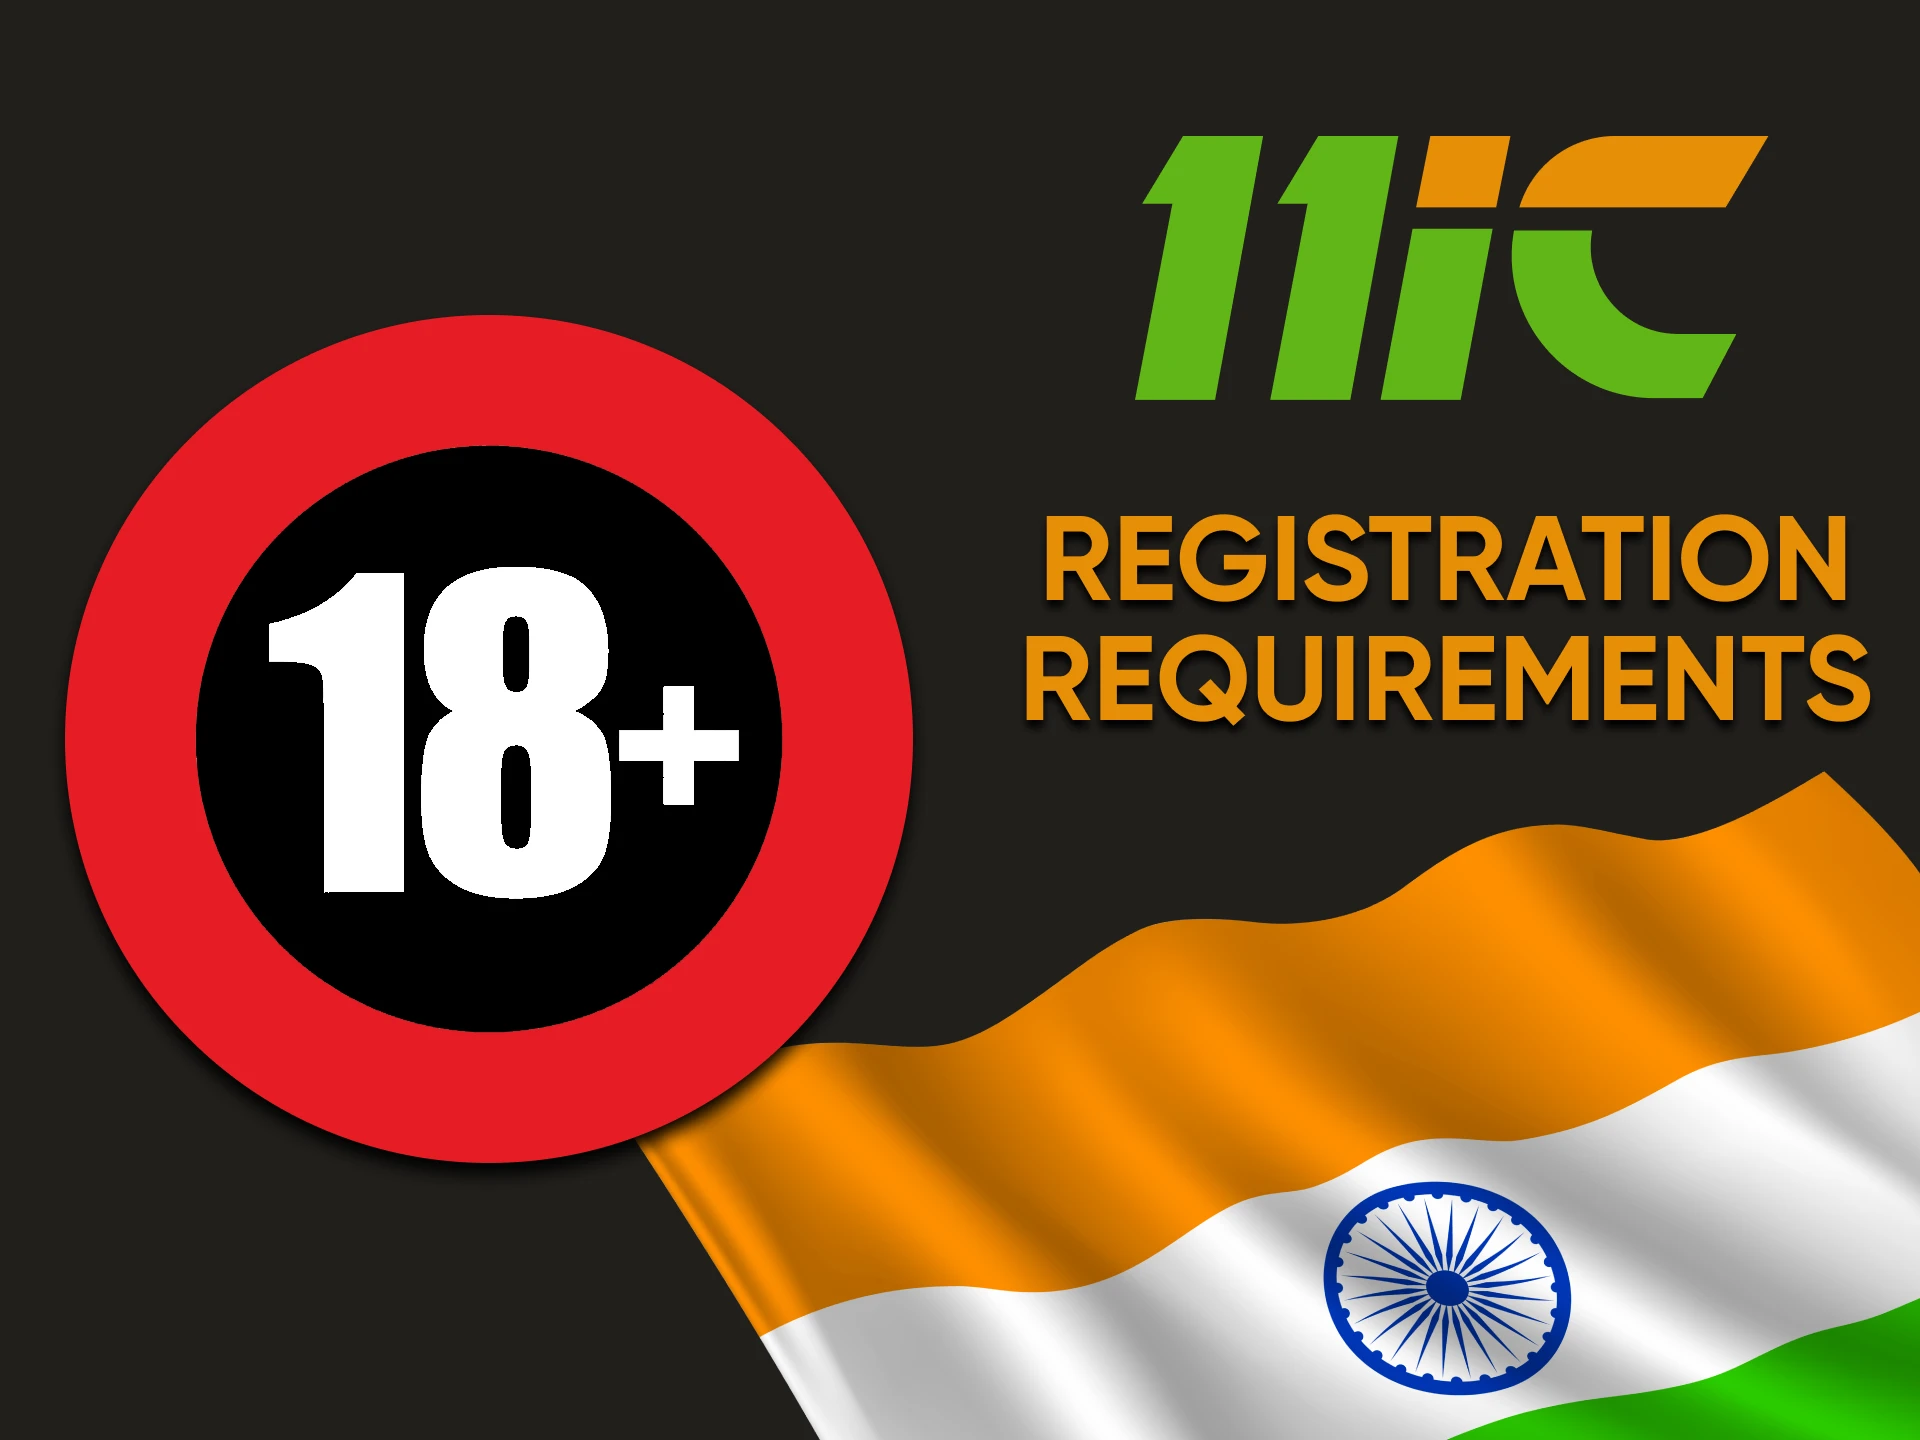 We will tell you about the requirements for registering for 11ic.